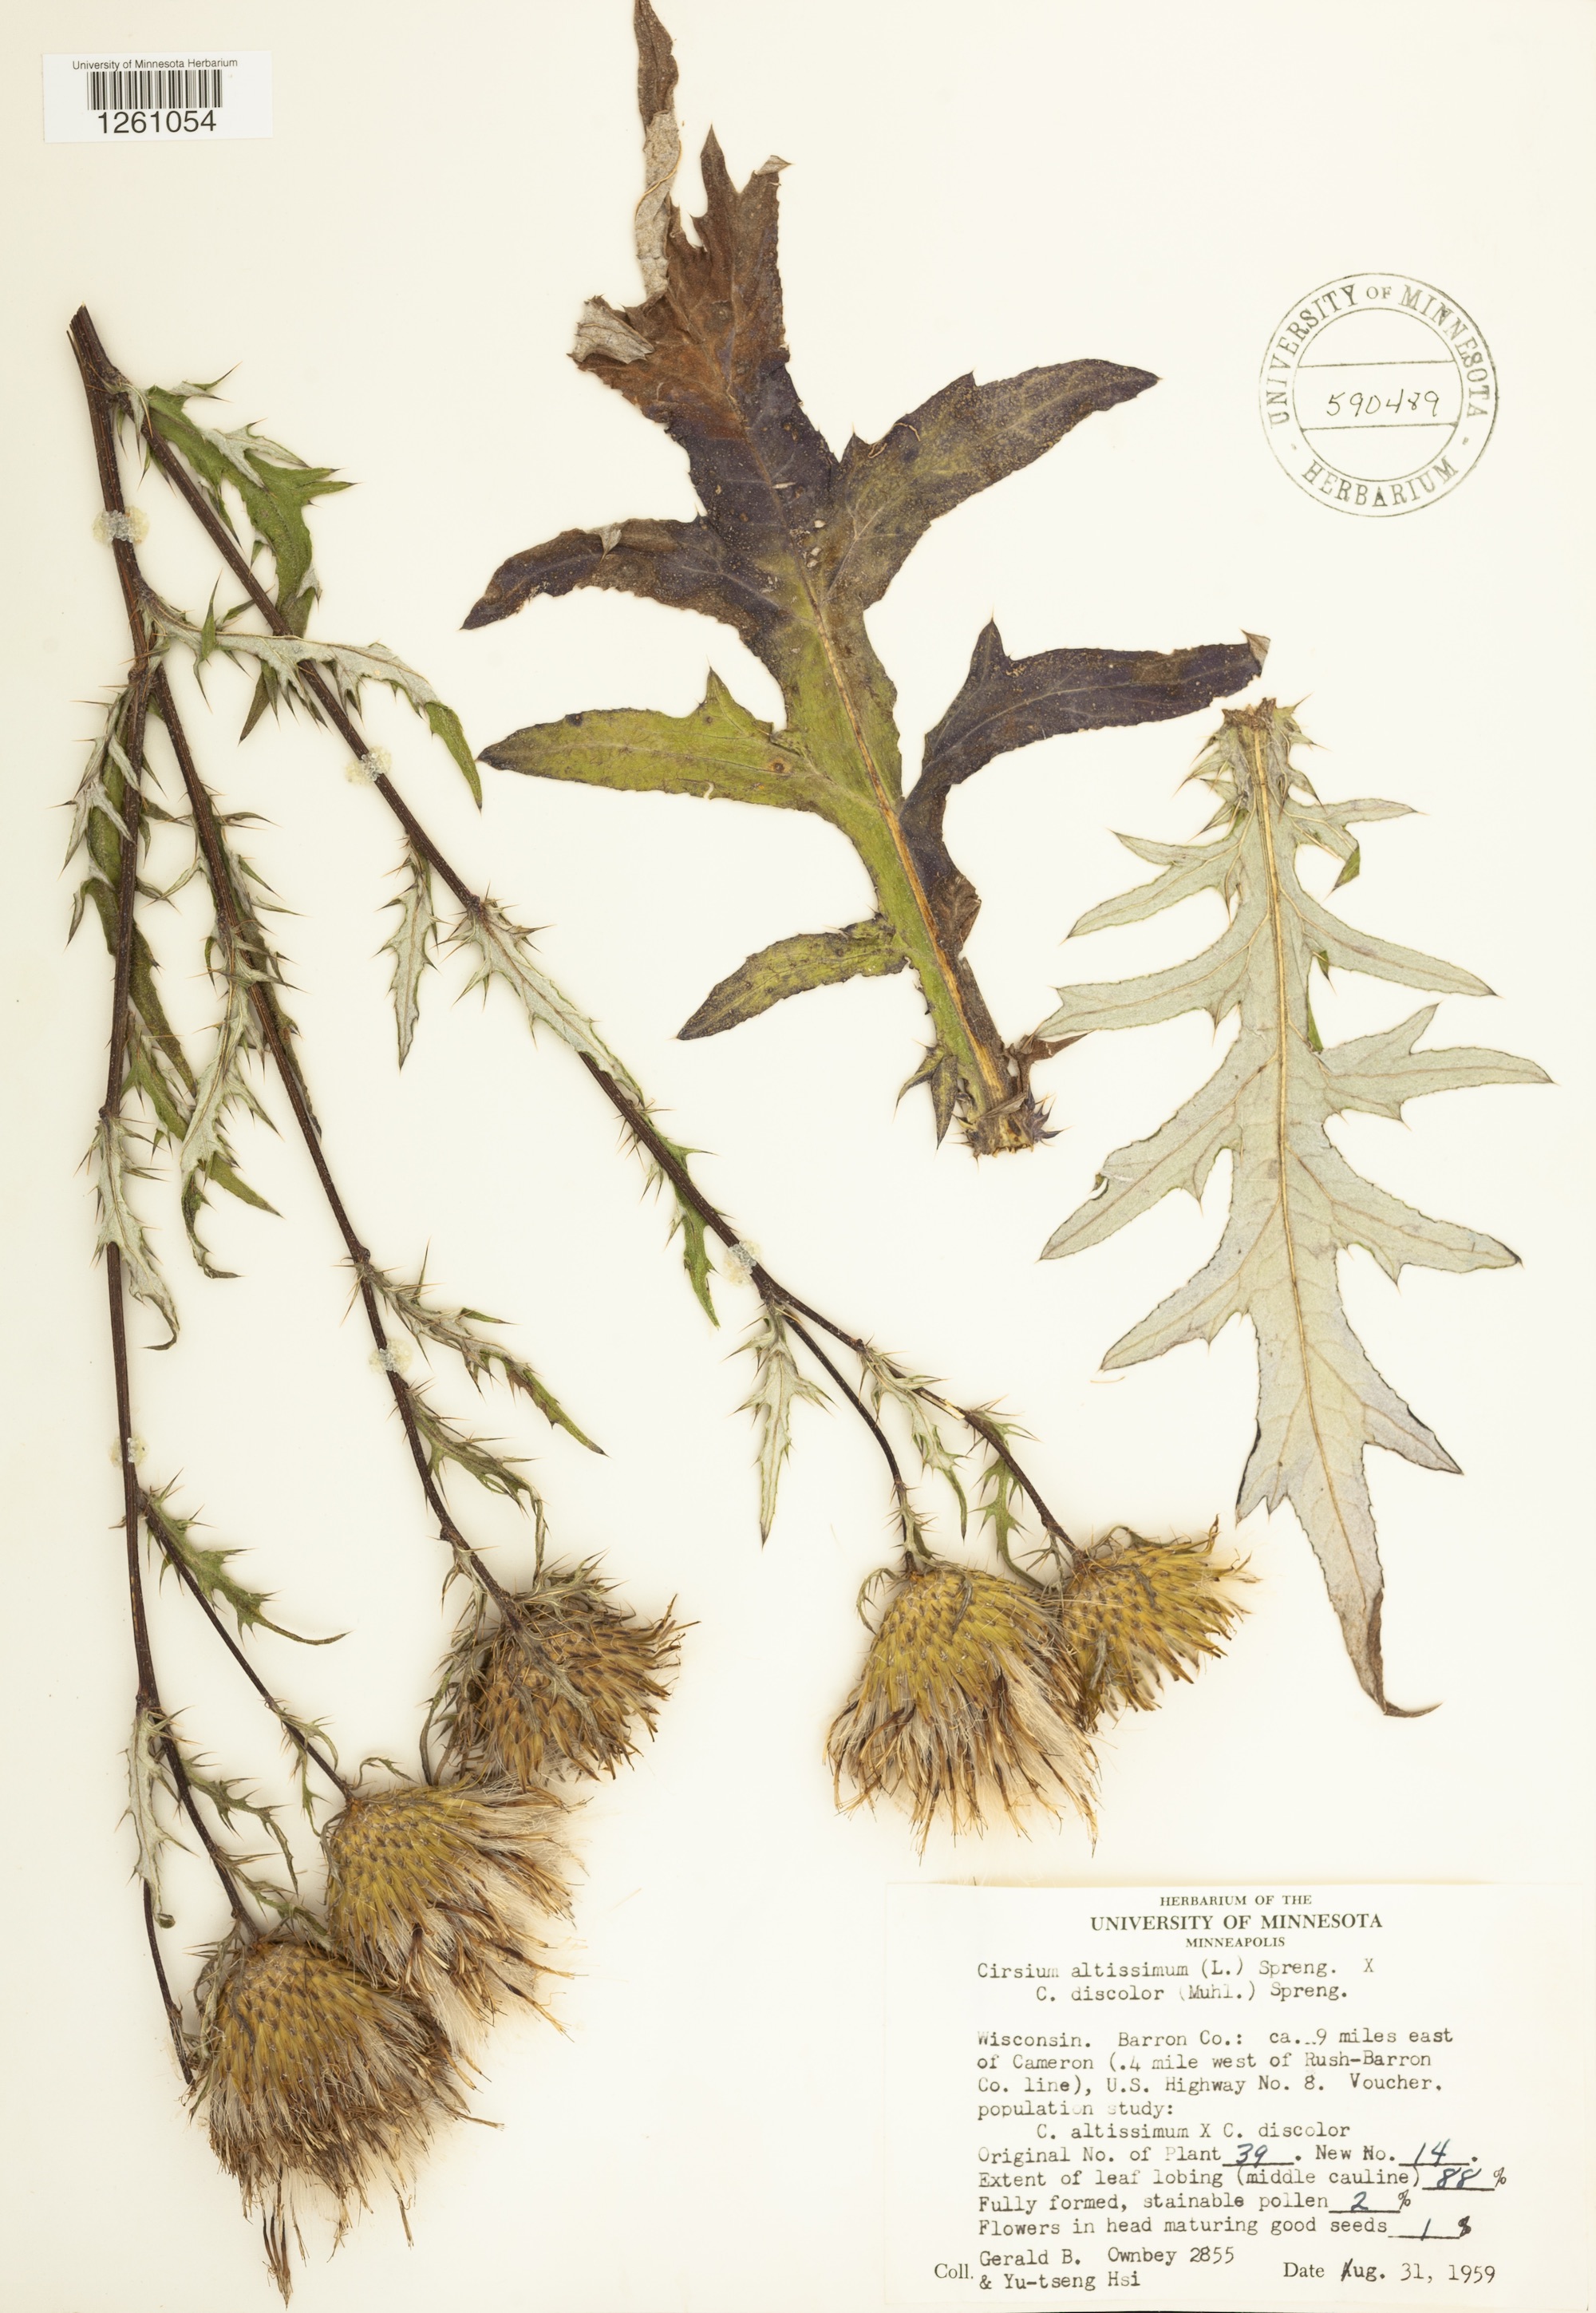 Tall Thistle, Field Thistle hybrid specimen collected in August 31, 1959 in Barron County, Wisconsin.